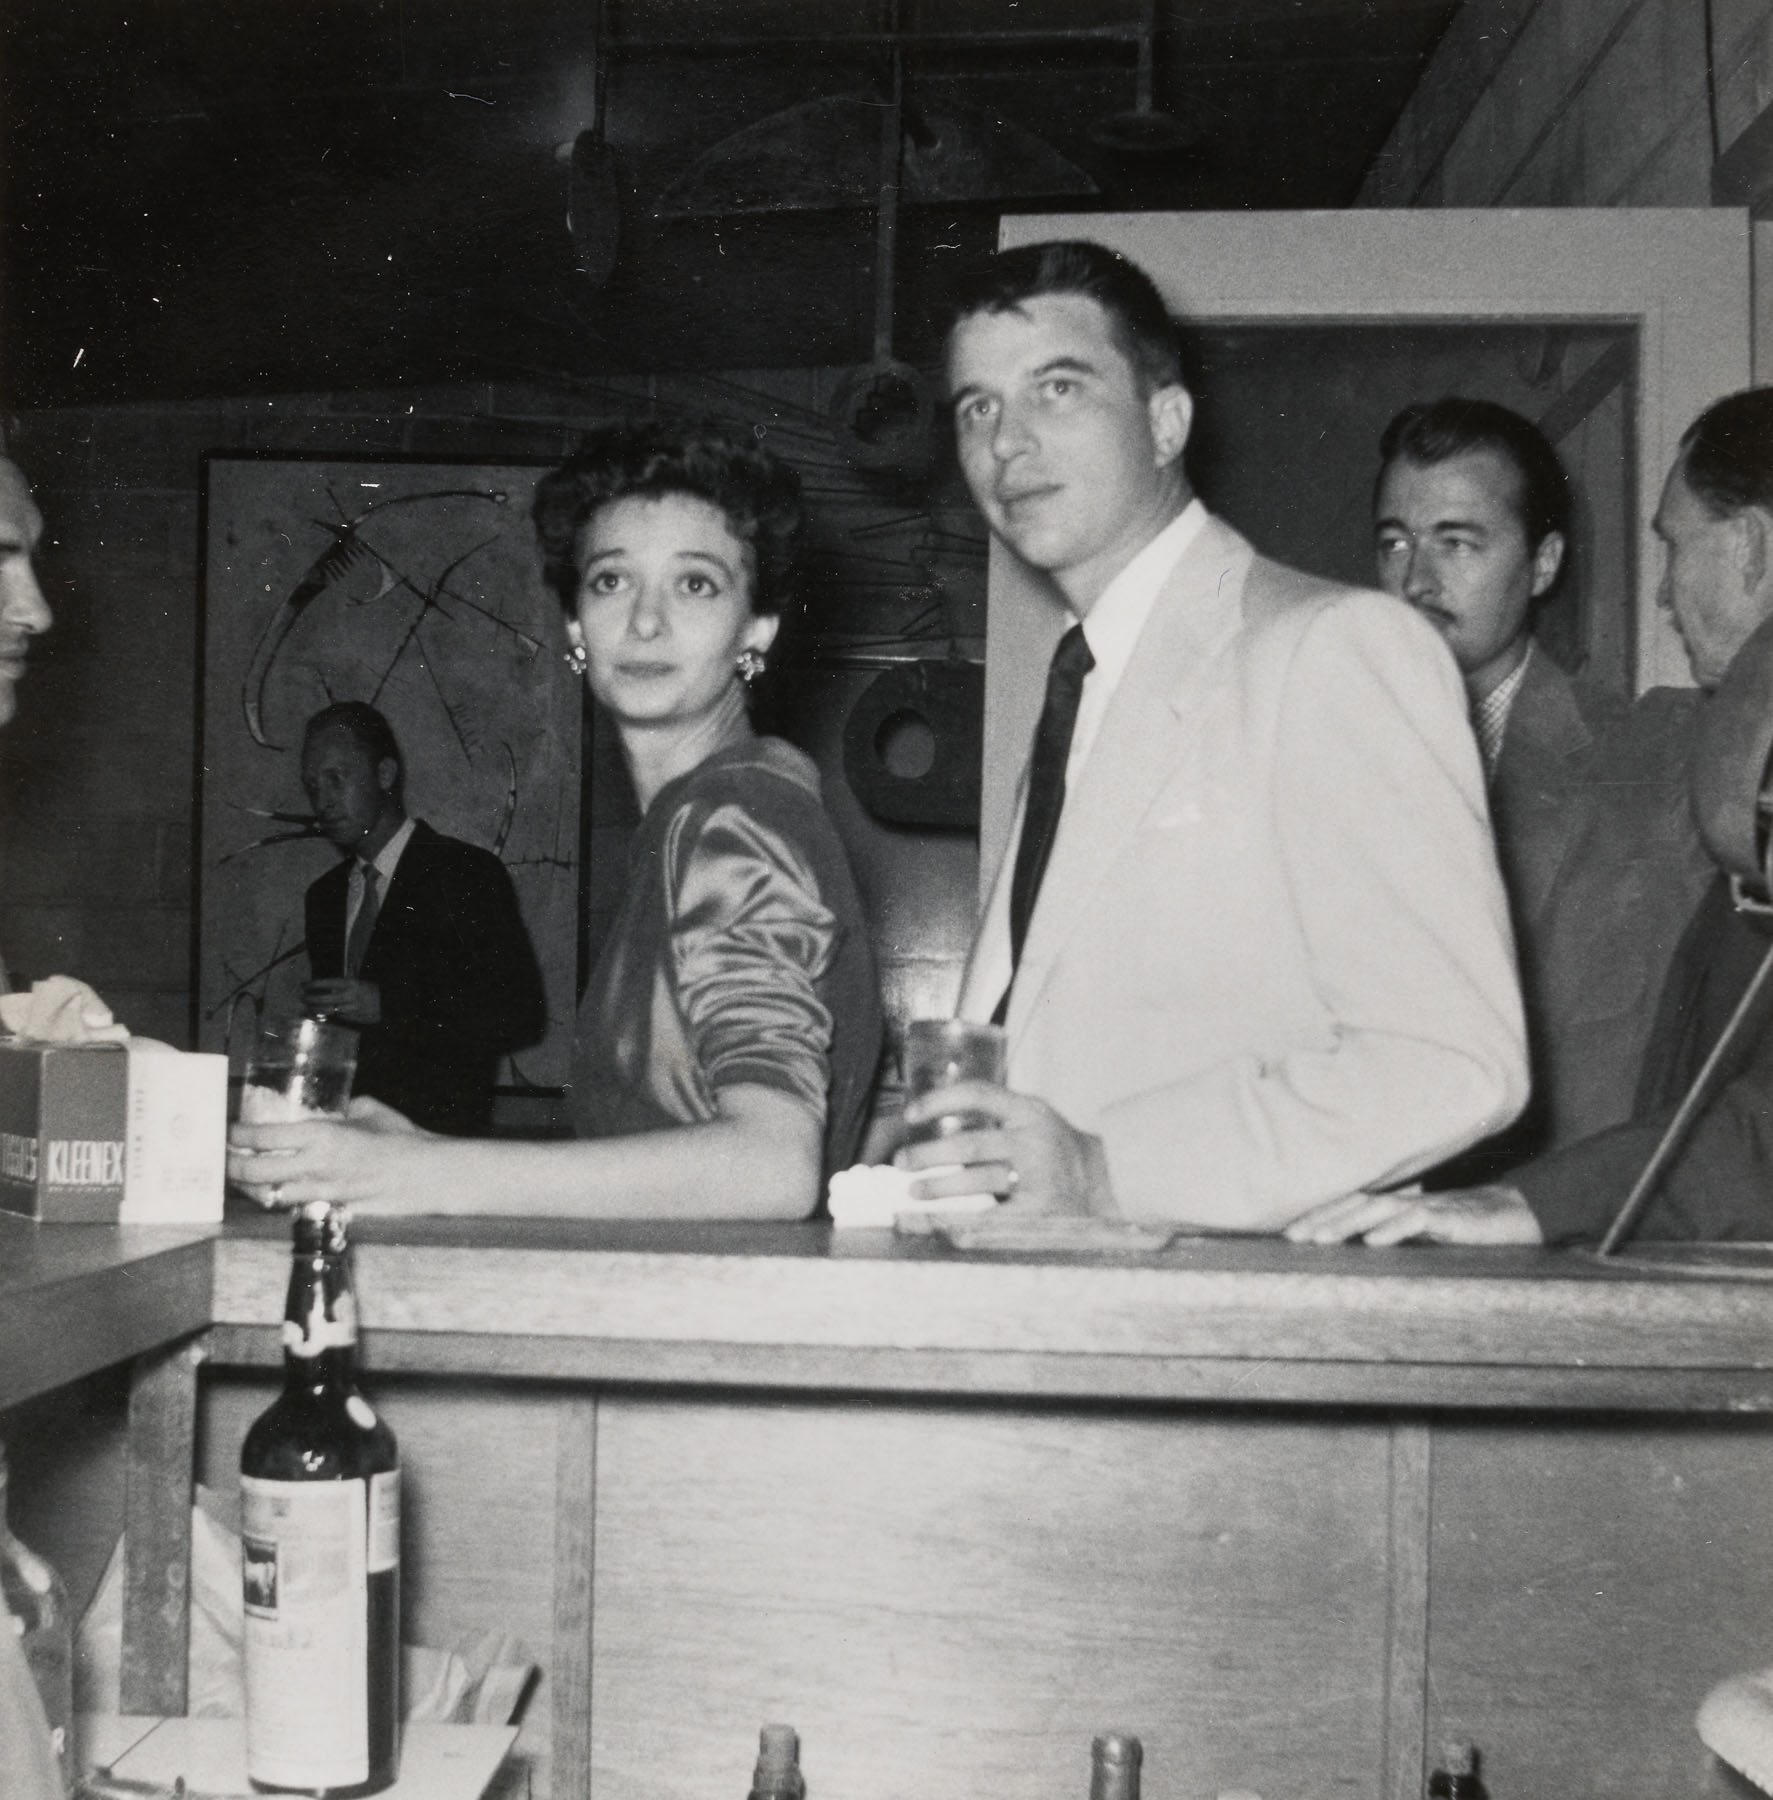 Black-and-white photo of a woman and a man at a bar holding drinks in their hands.